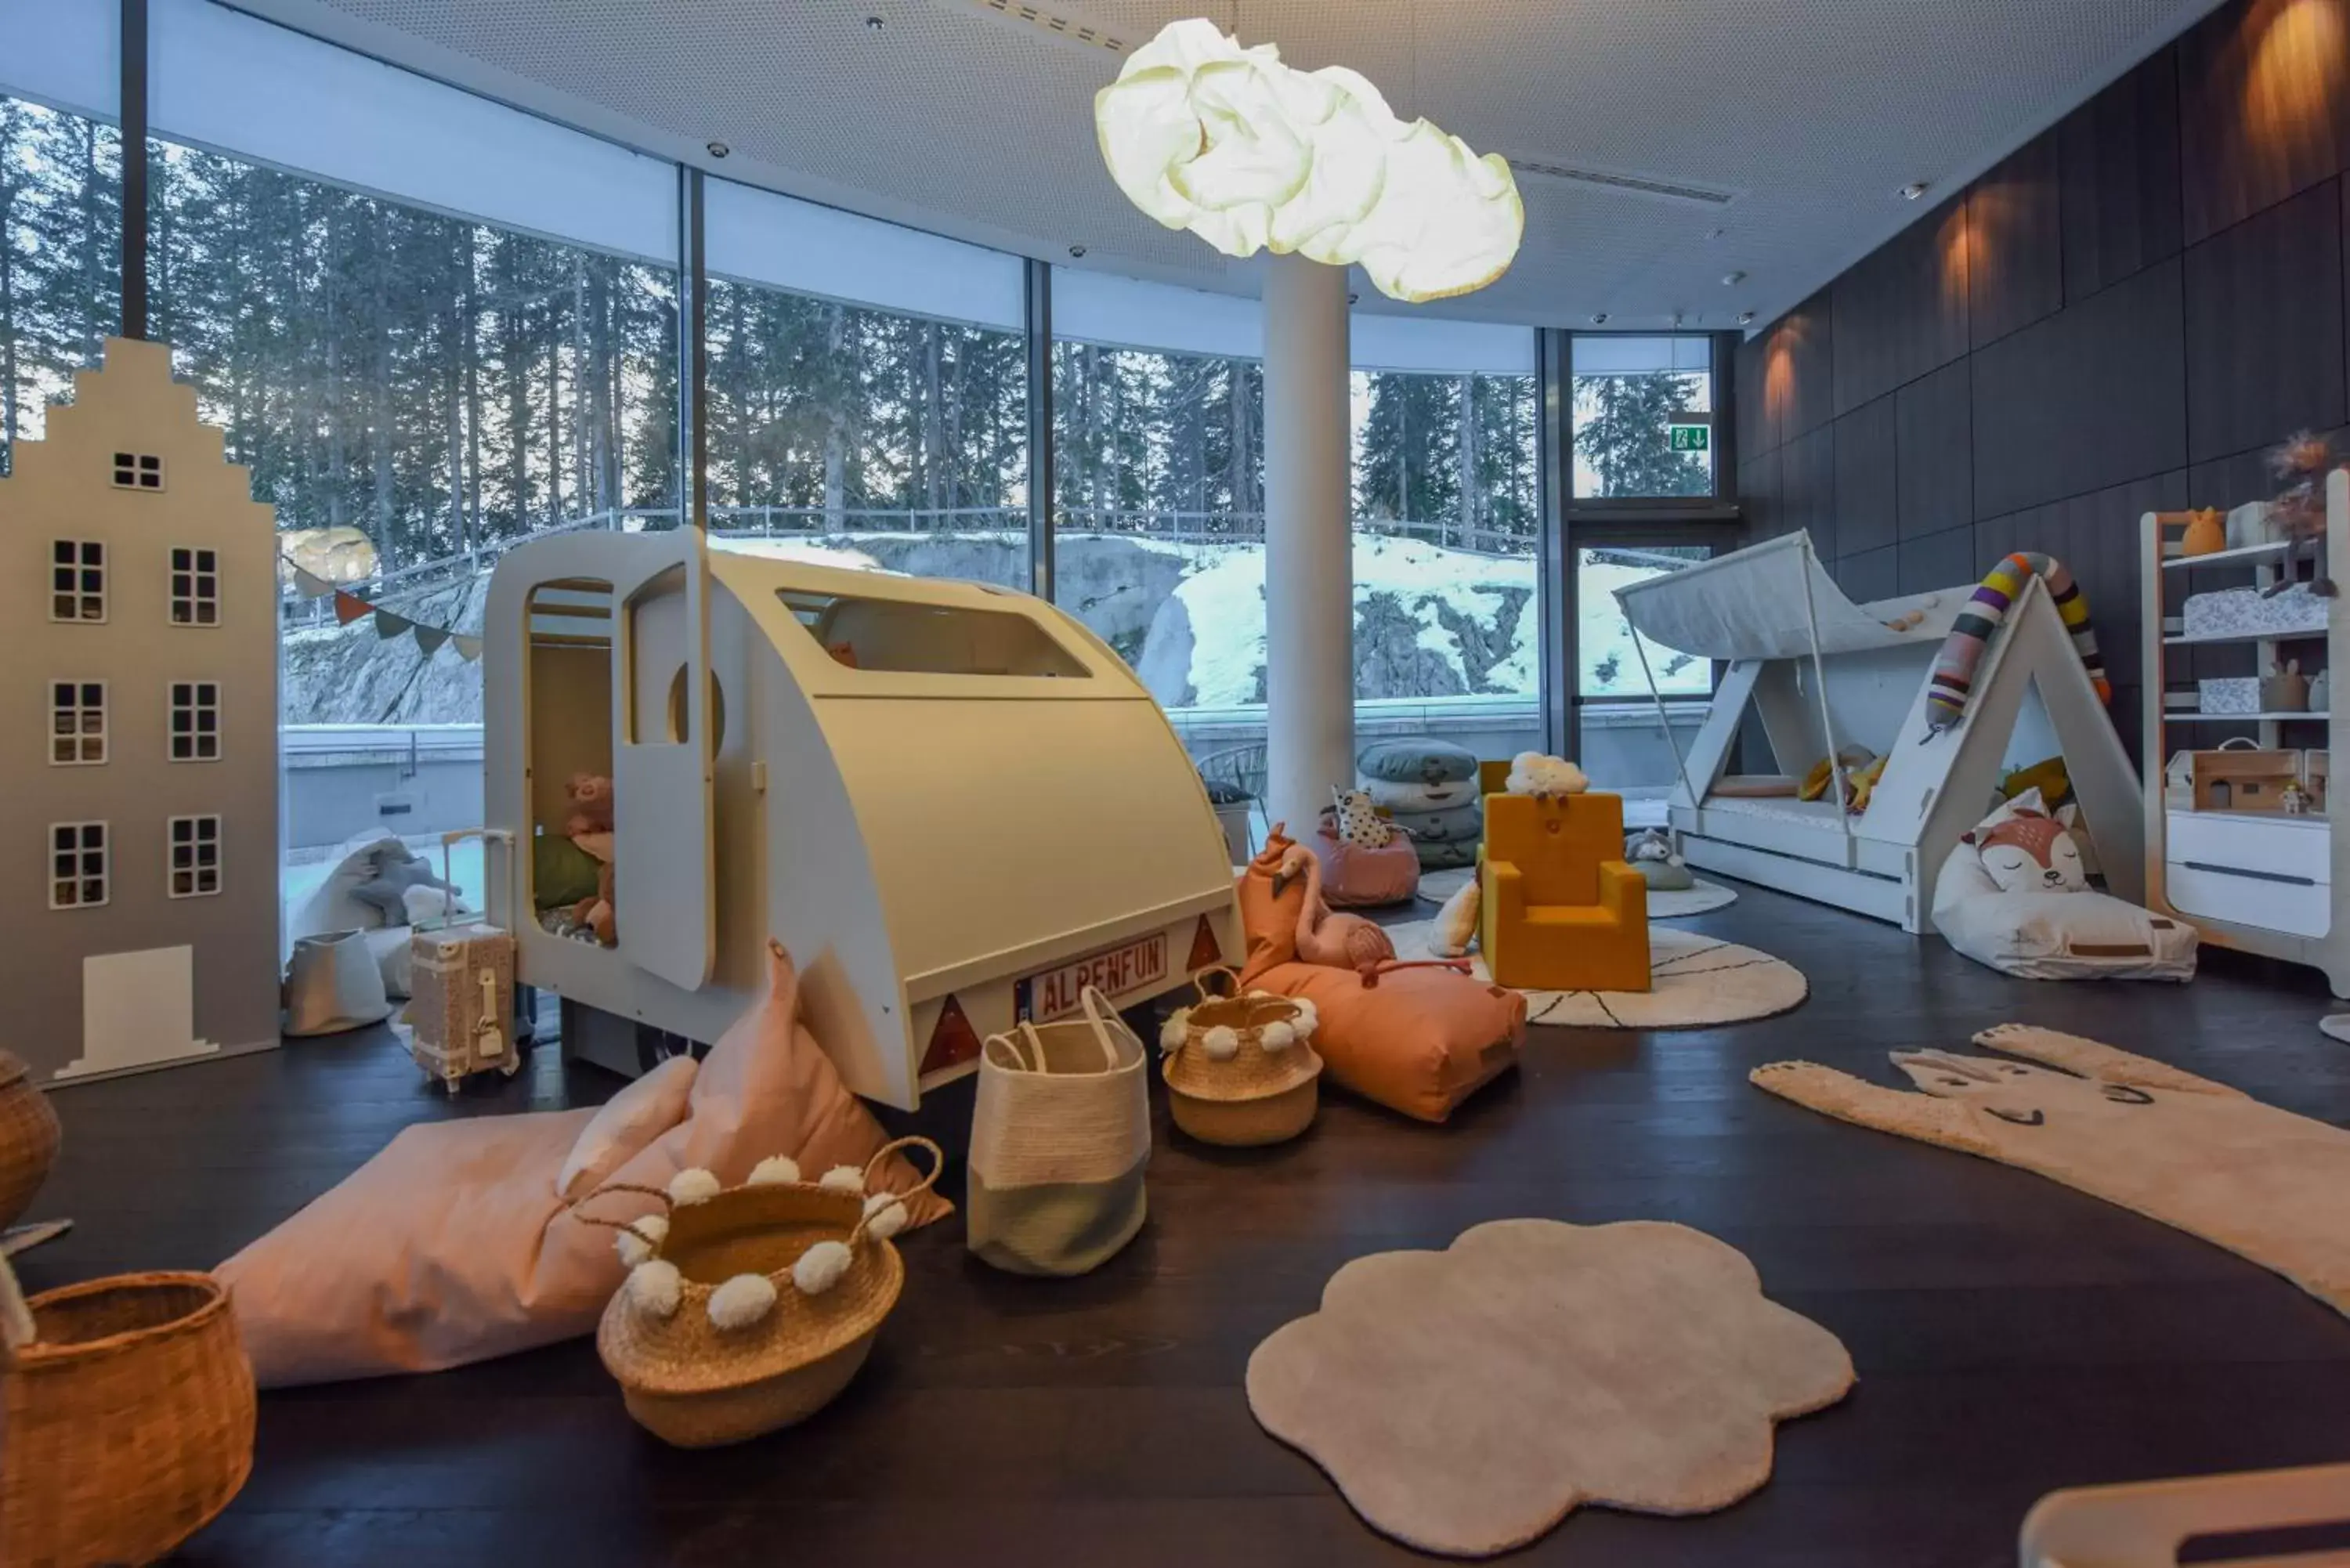 Kids's club in AlpenGold Hotel Davos